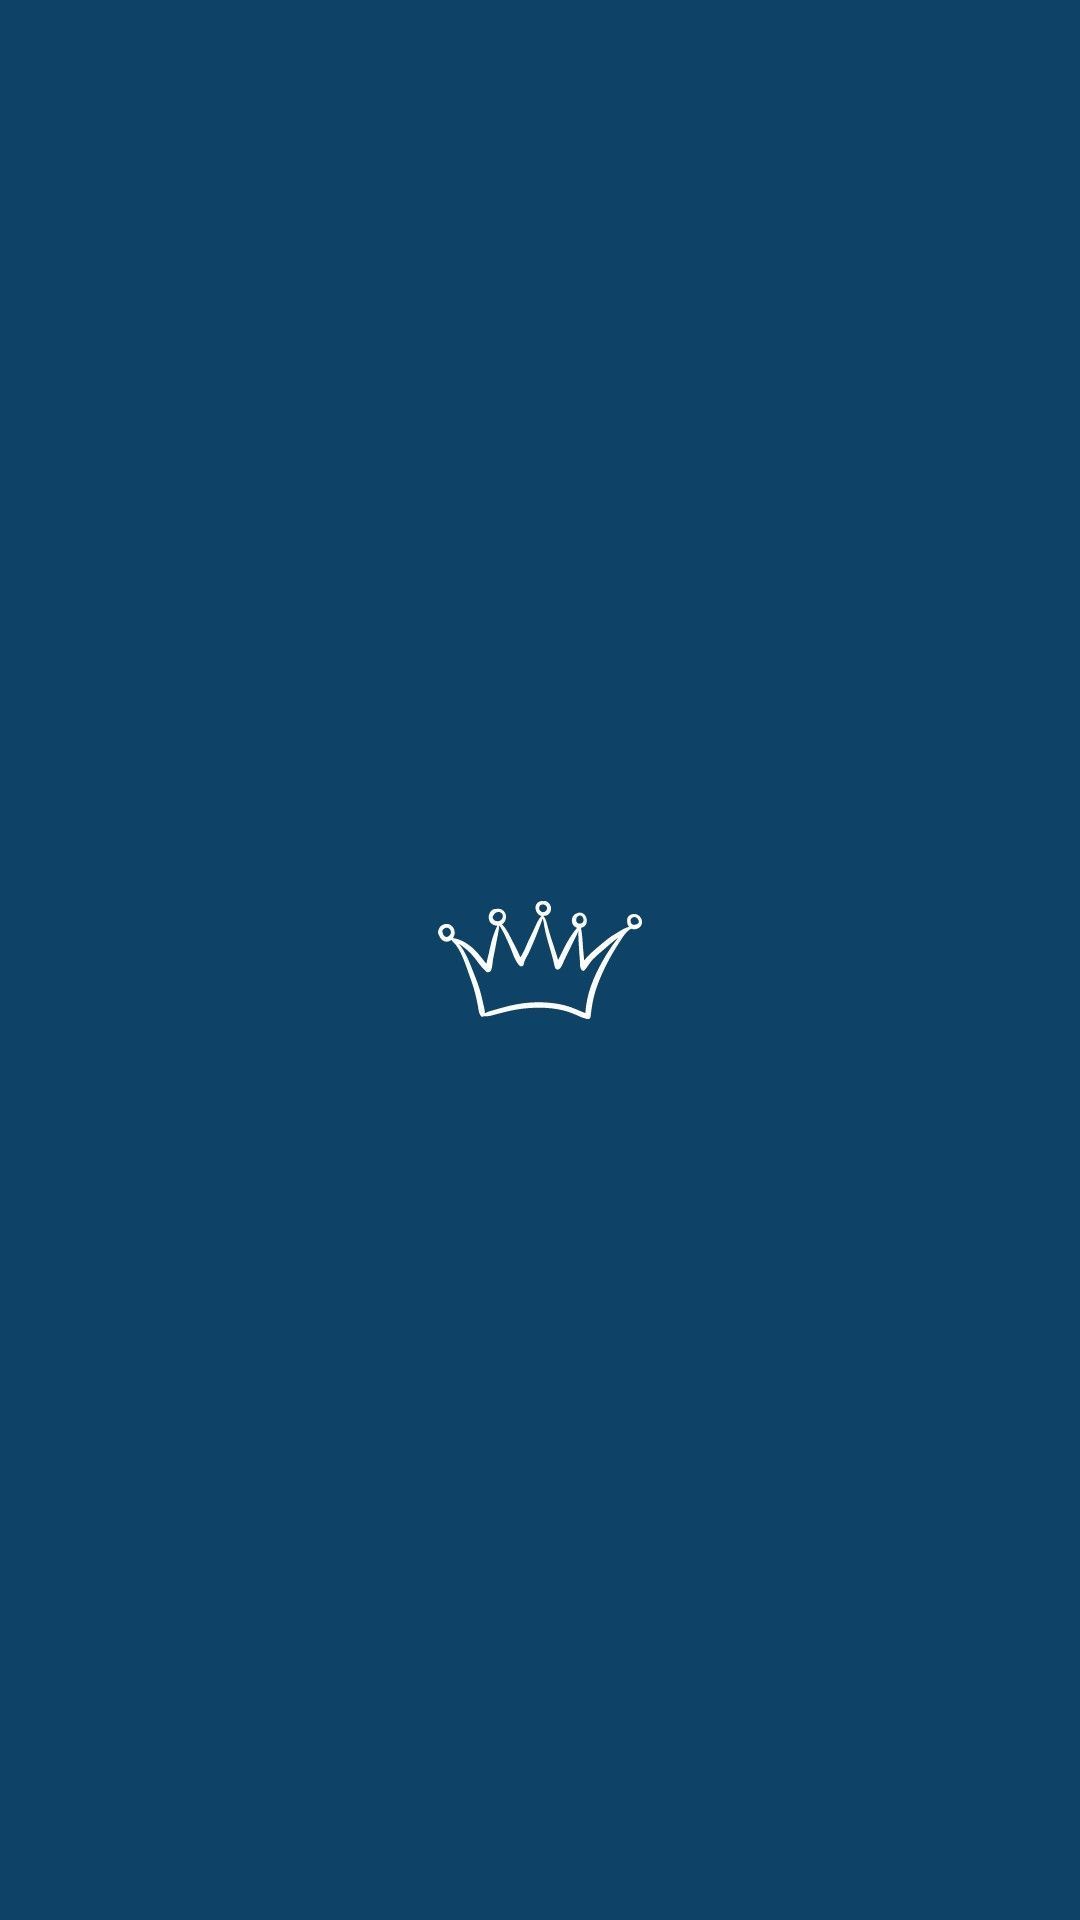 IPhone wallpaper with a simple crown on a blue background - Crown